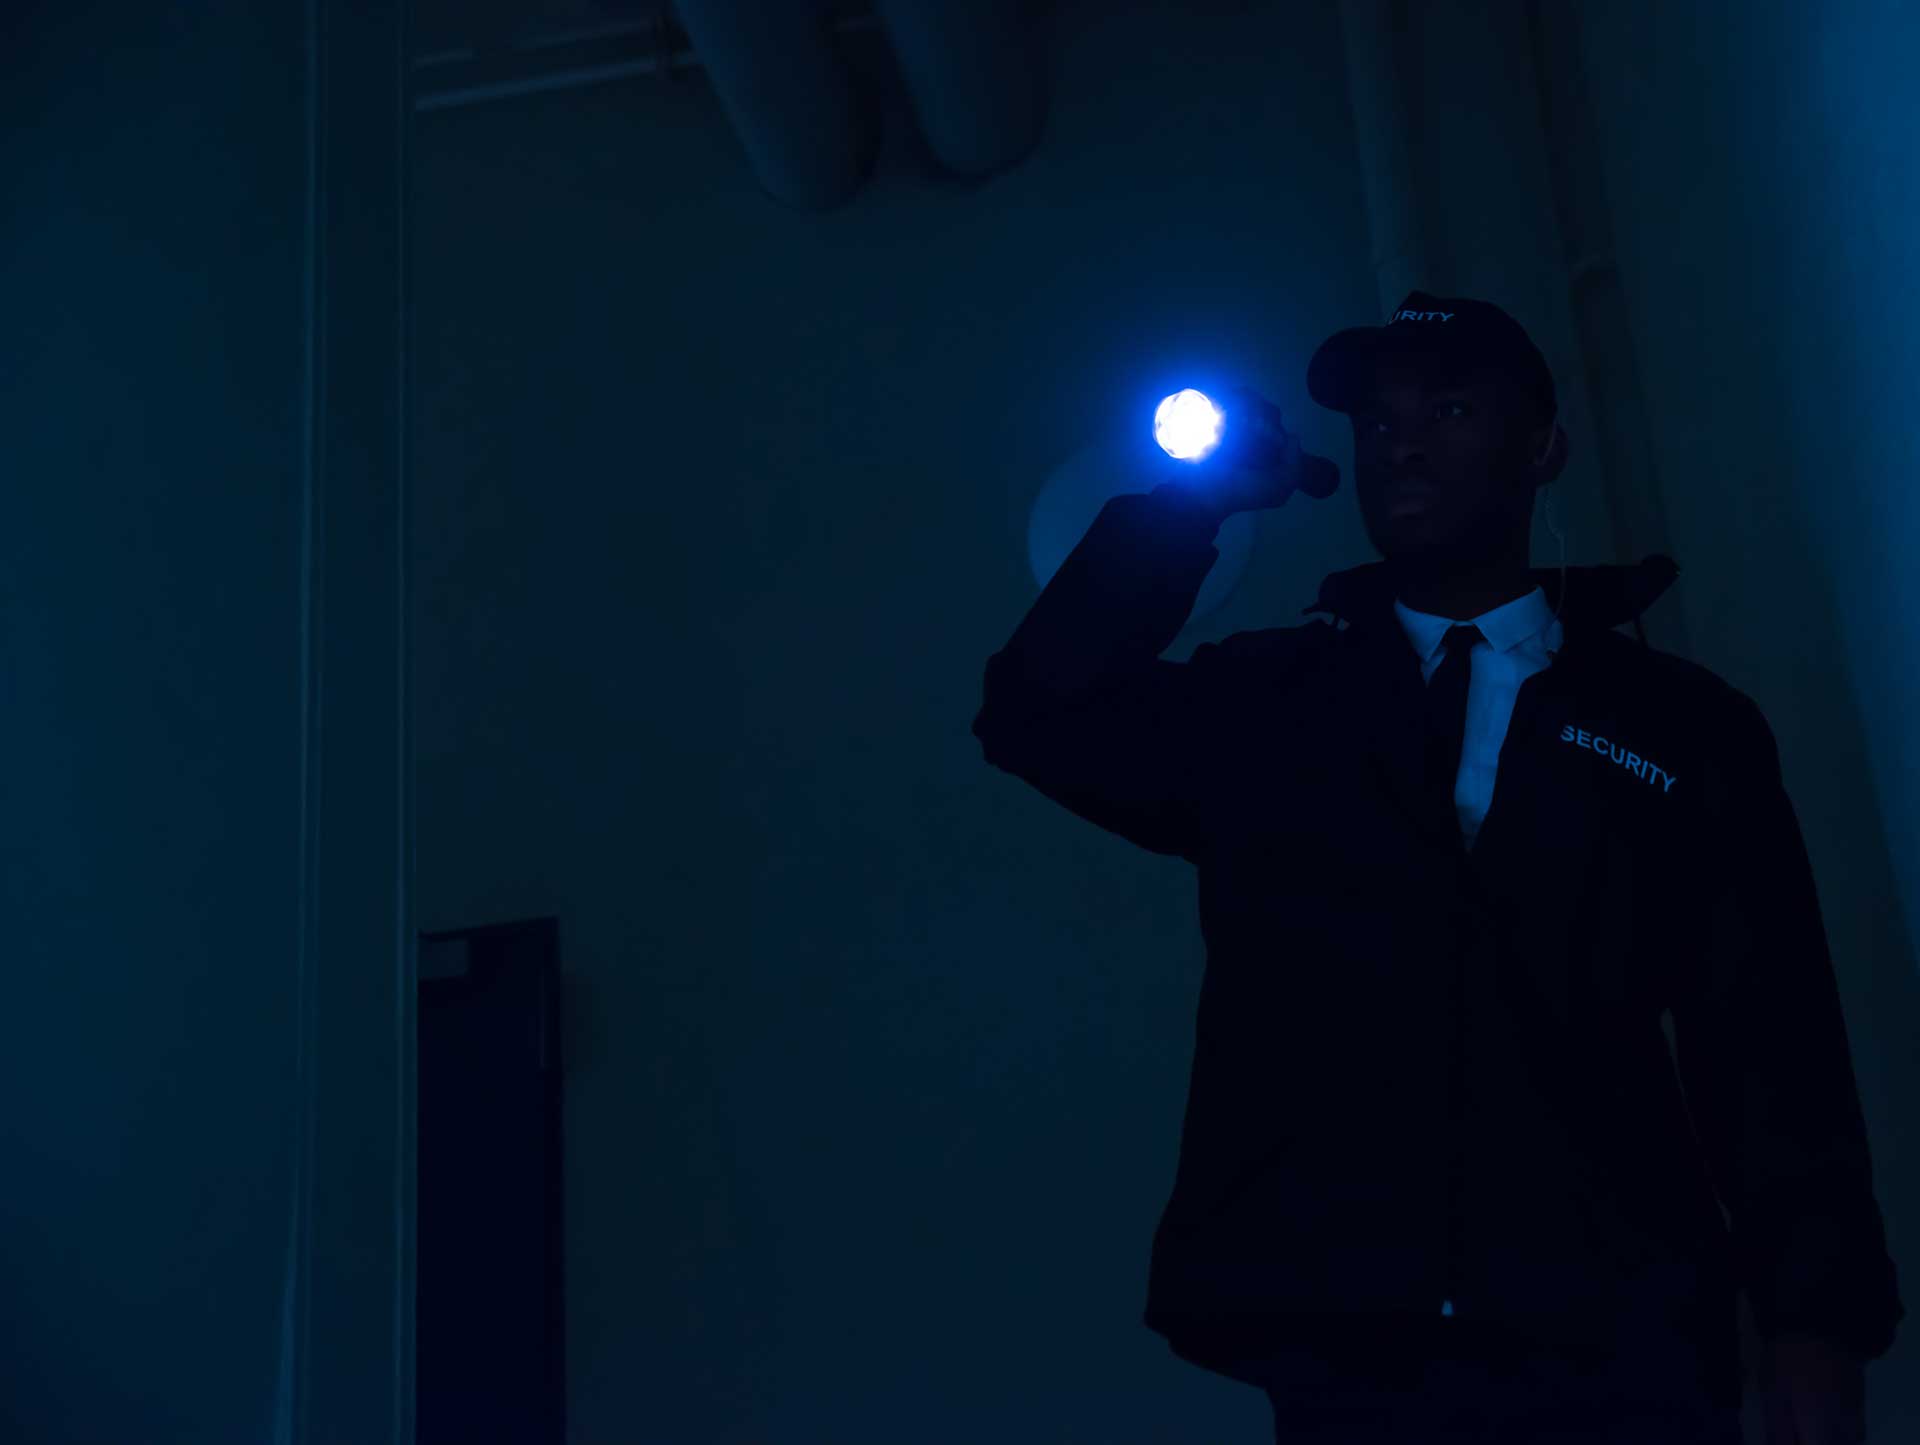 A security guard shining a light in the dark